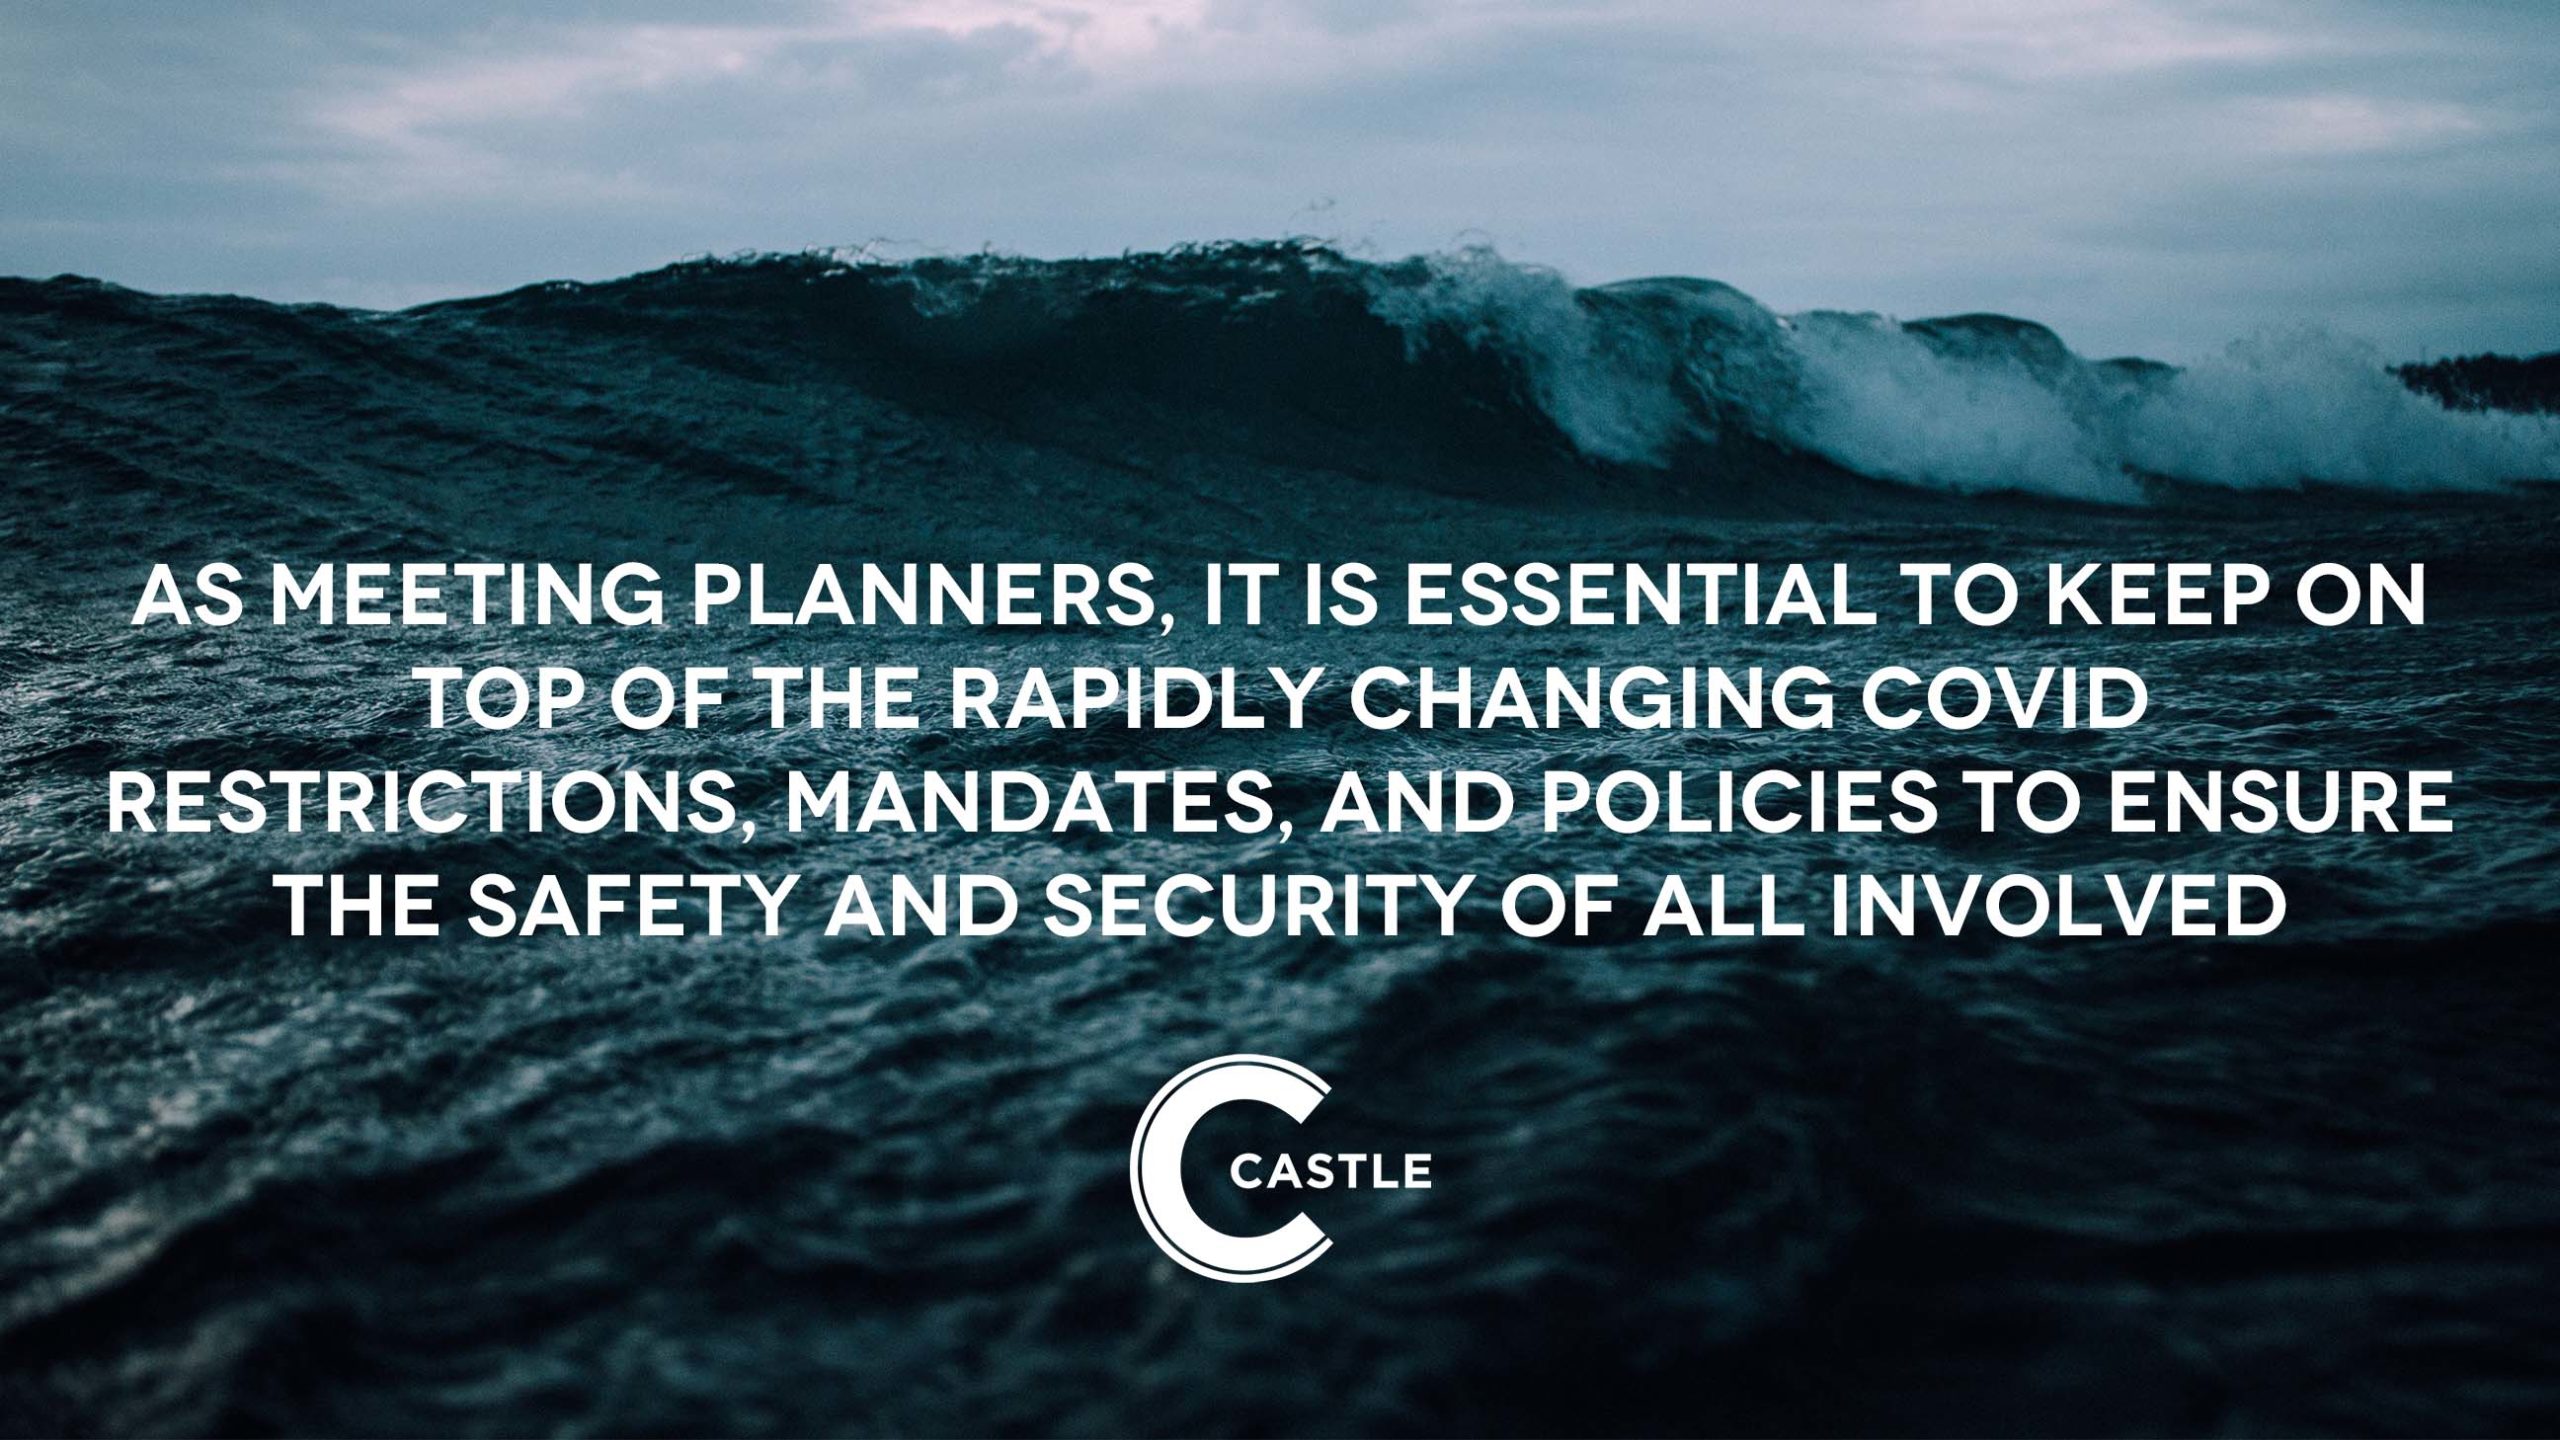 Image of ocean waves with text that says, As meeting planners, it is essential to keep on top of the rapidly changing Covid restrictions, mandates, and policies to ensure the safety and security of all involved